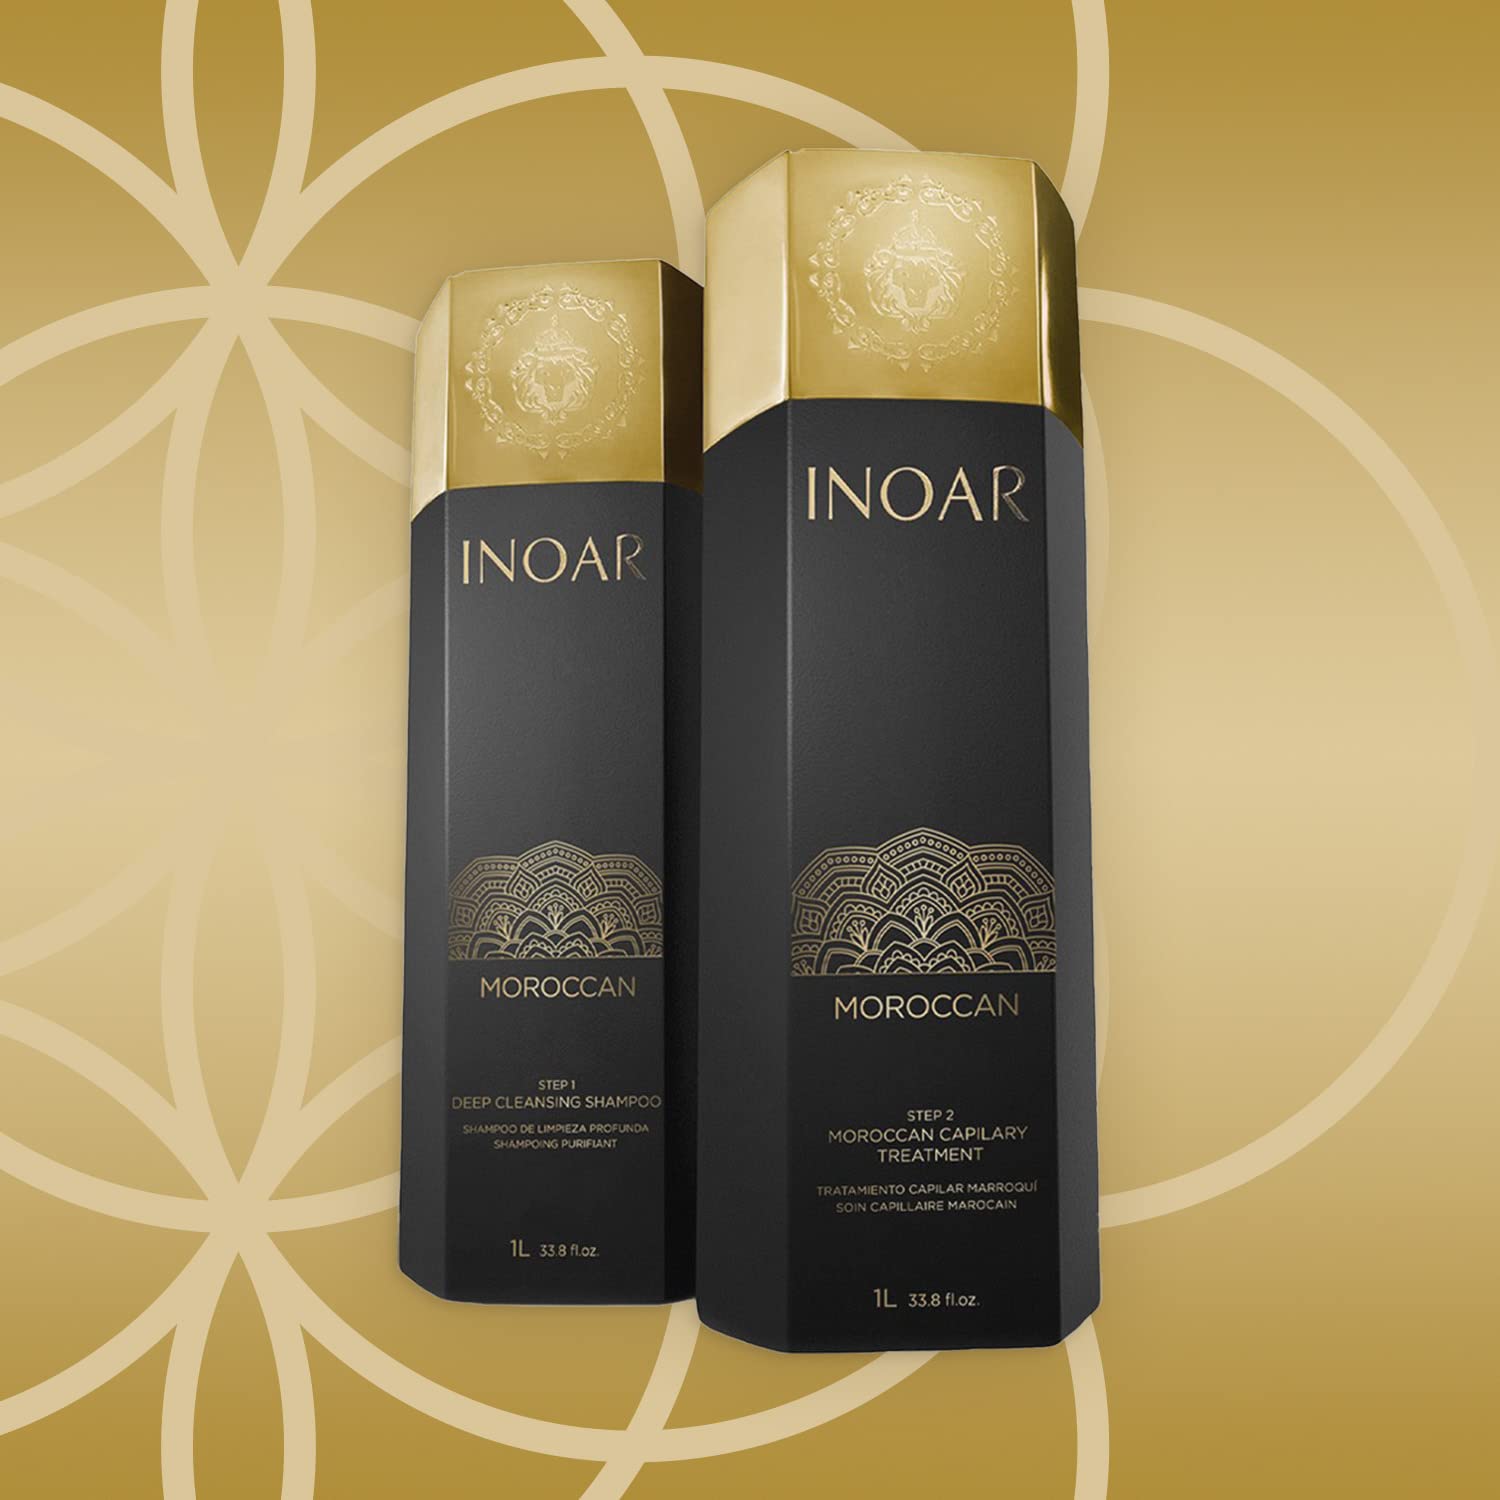 INOAR – Moroccan Smoothing Treatment Set with Keratin - Deep Cleansing Shampoo & Keratin Treatment, Curly Hair Care, Vegan Hair Product, Cruelty Free Haircare for Men and Women (33.8 oz. Each)